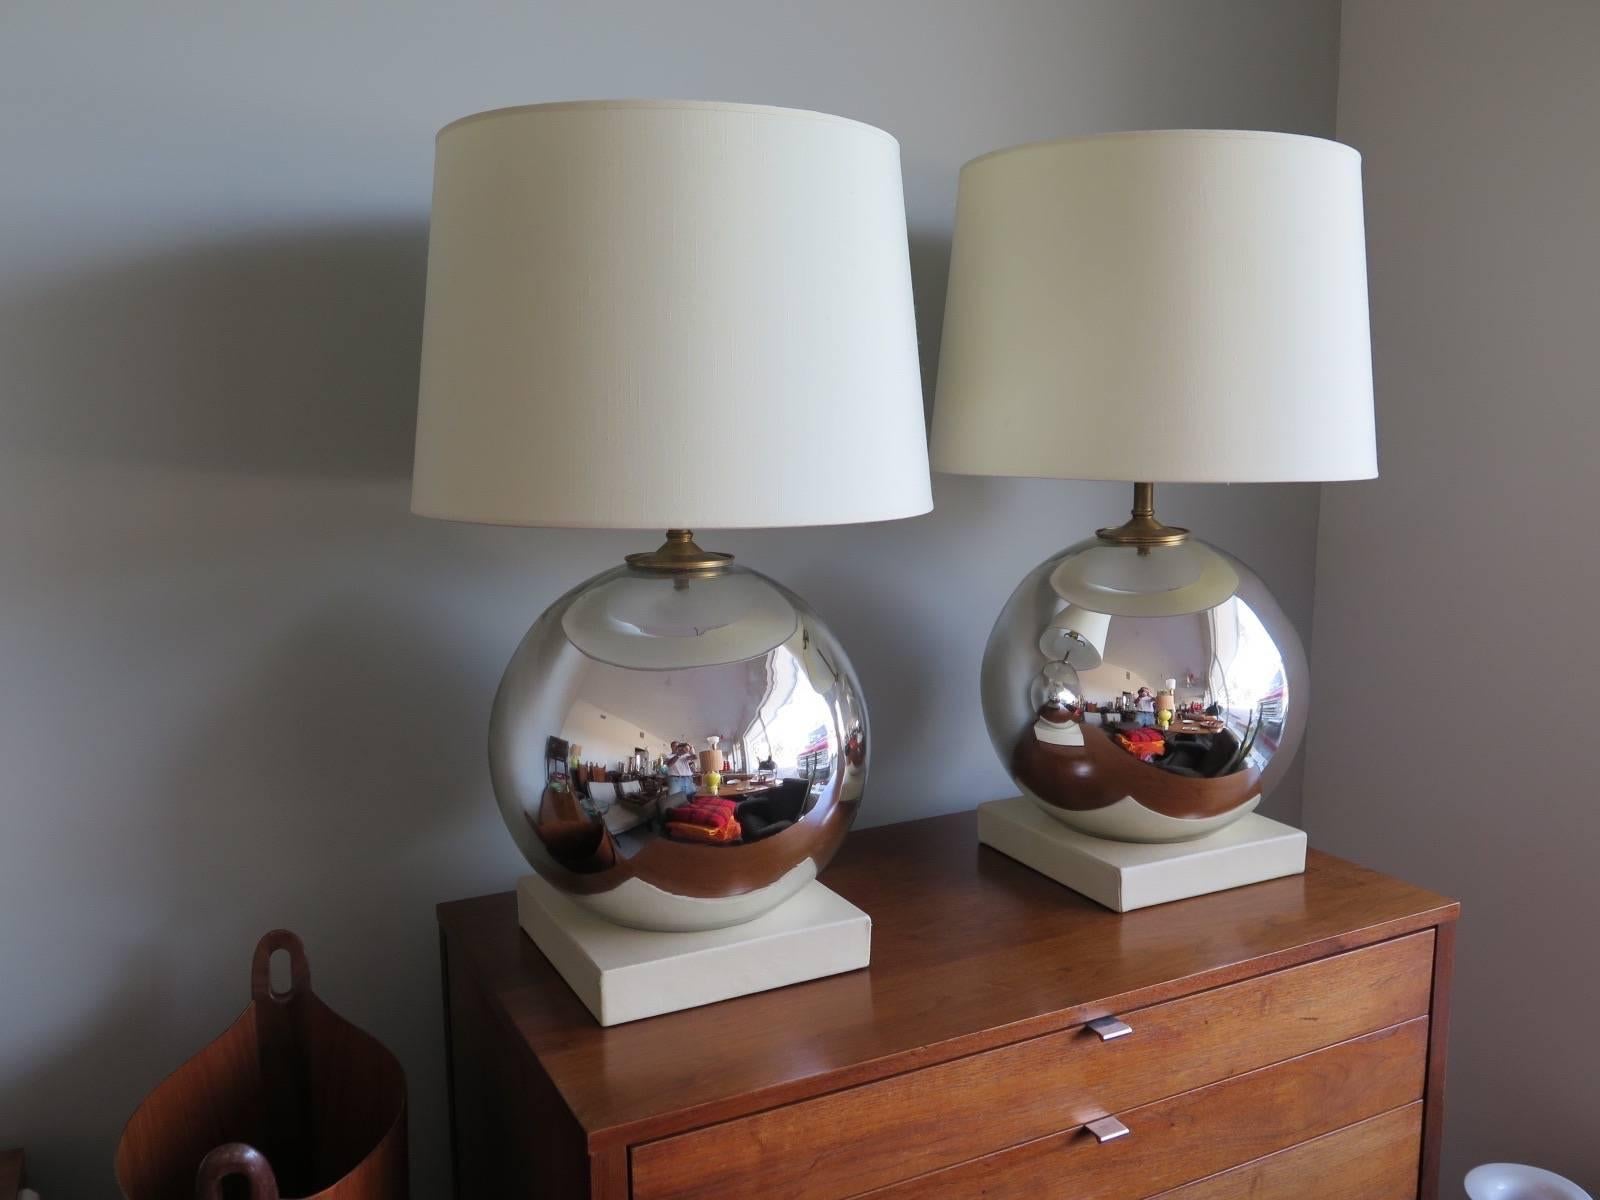 A pair of interesting mercury ball shaped lamps, made in Italy. Original linen shades, solid brass hardware with heavy solid brass finials and hand stitched leather wrapped bases. Measure approx. 29.5